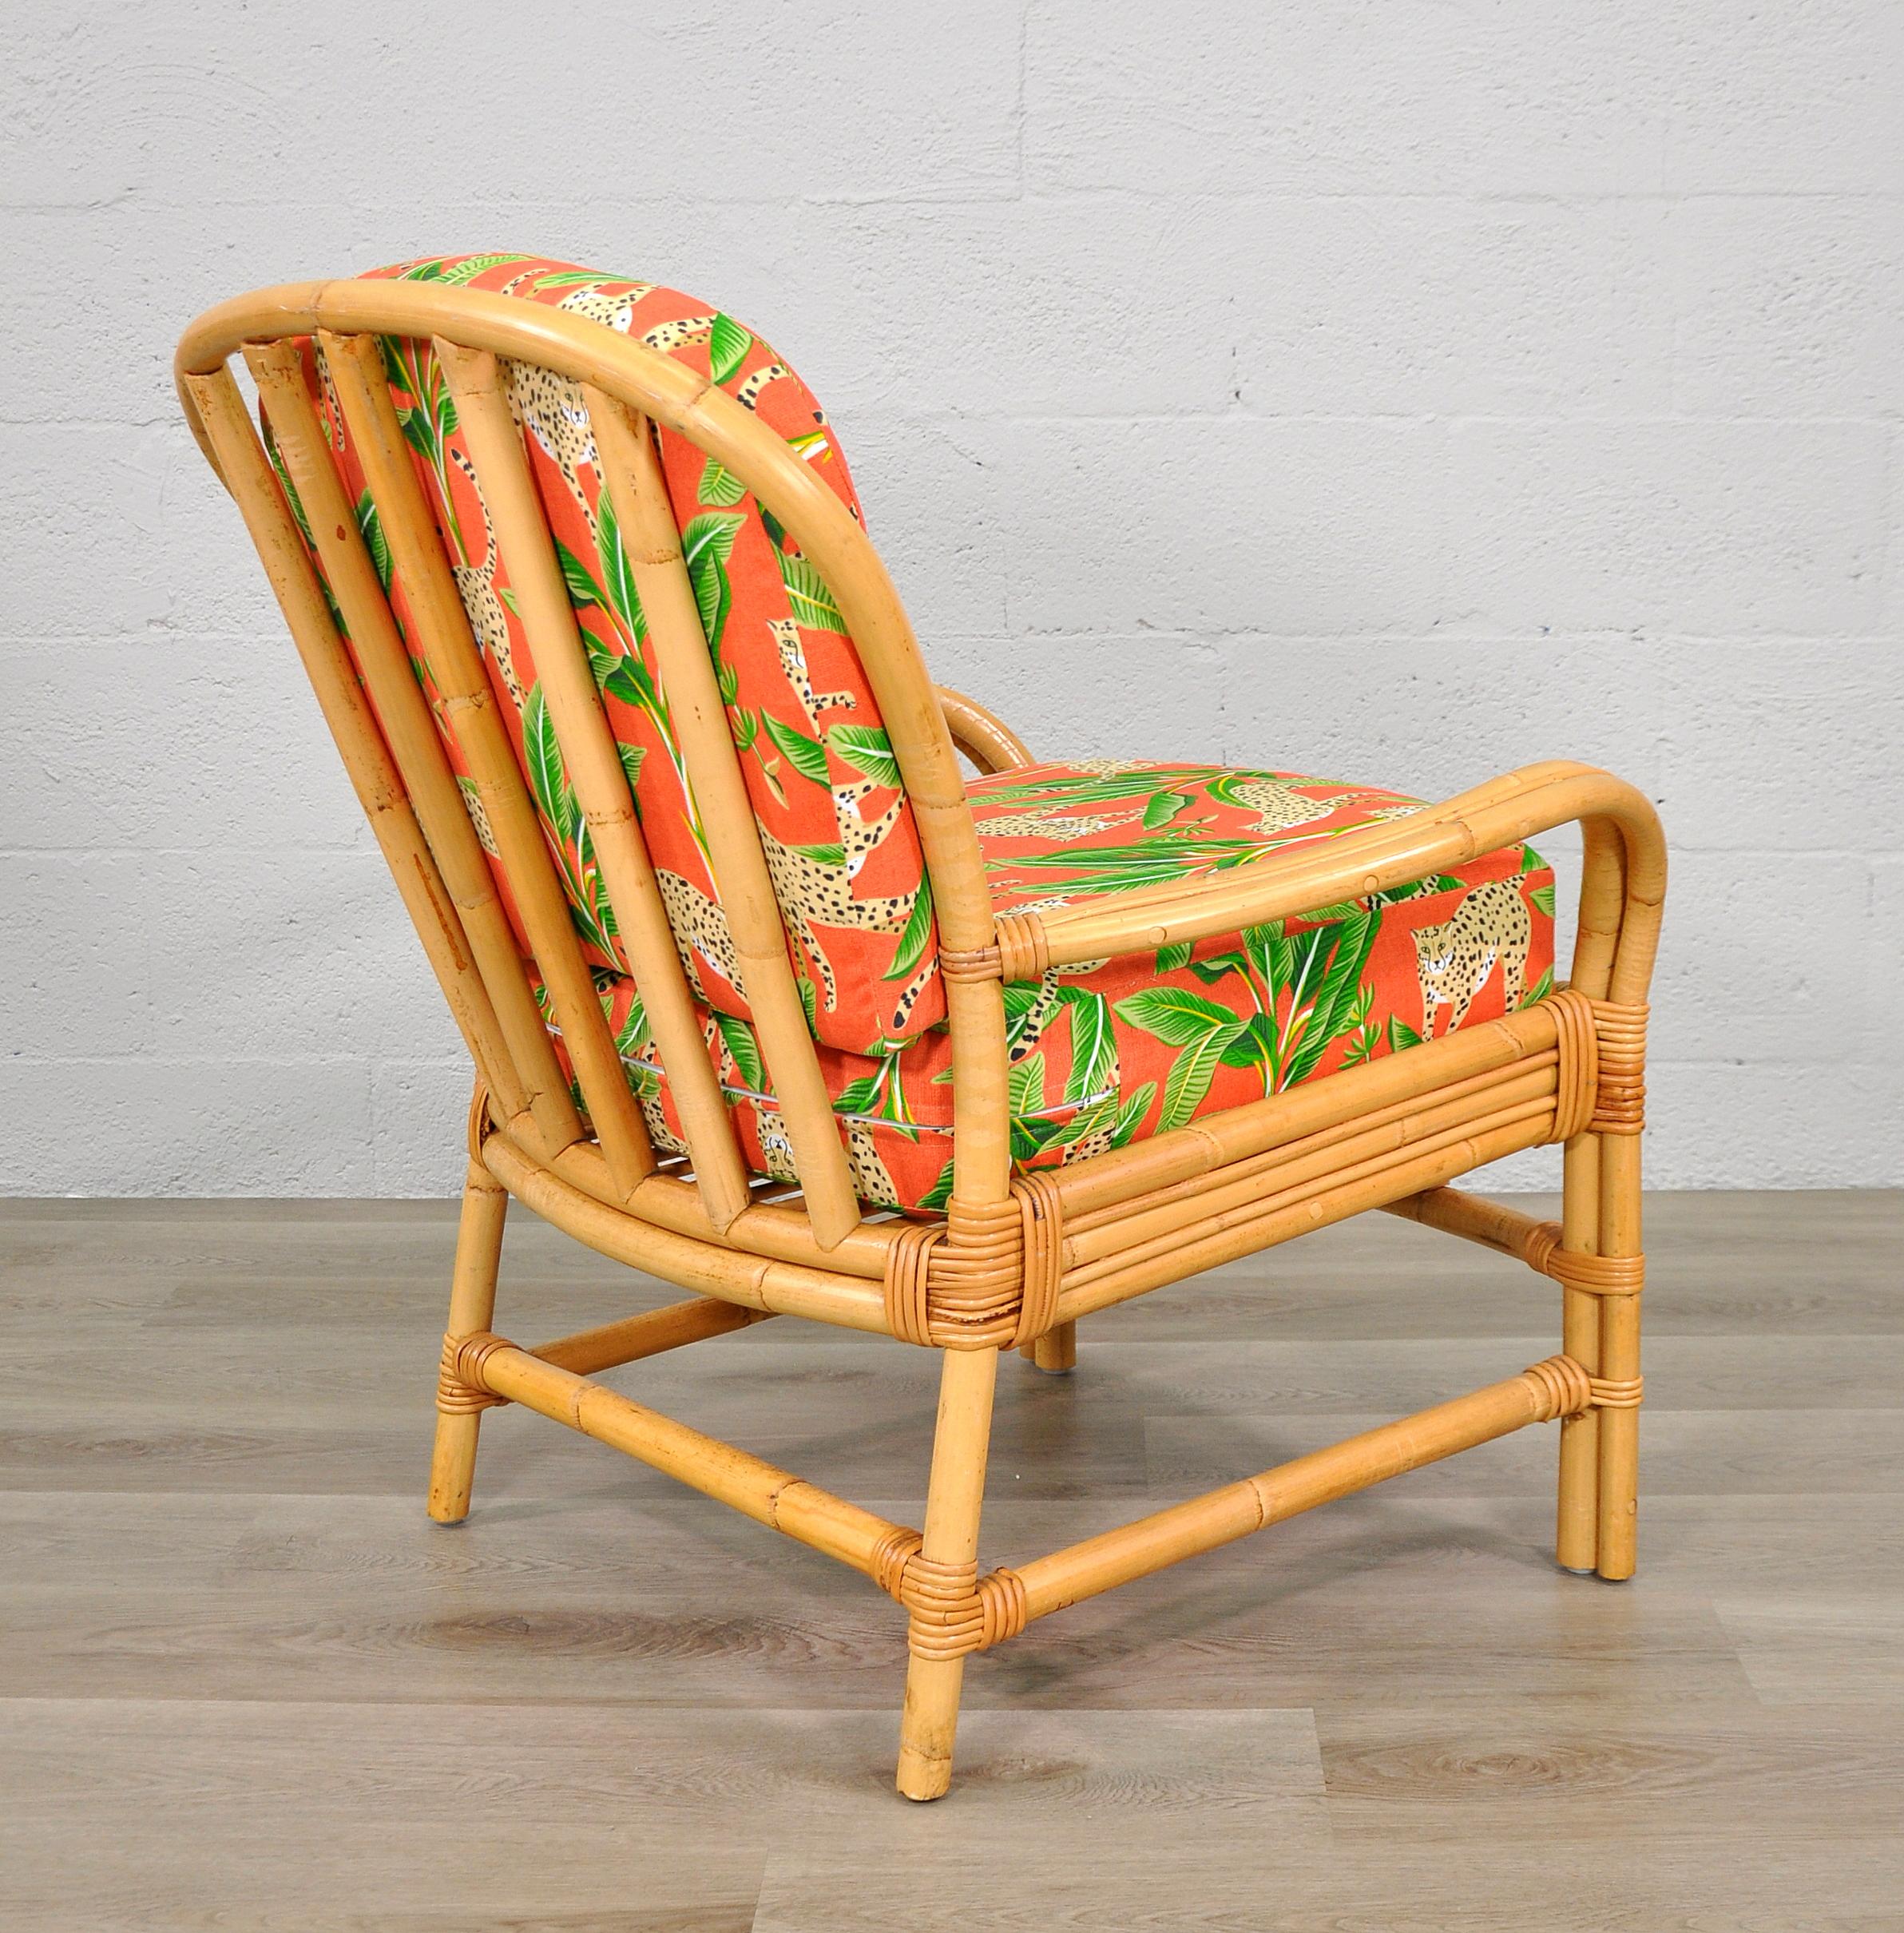 Late 20th Century Rattan Chair with Tropical Cheetah and Palm Fabric For Sale